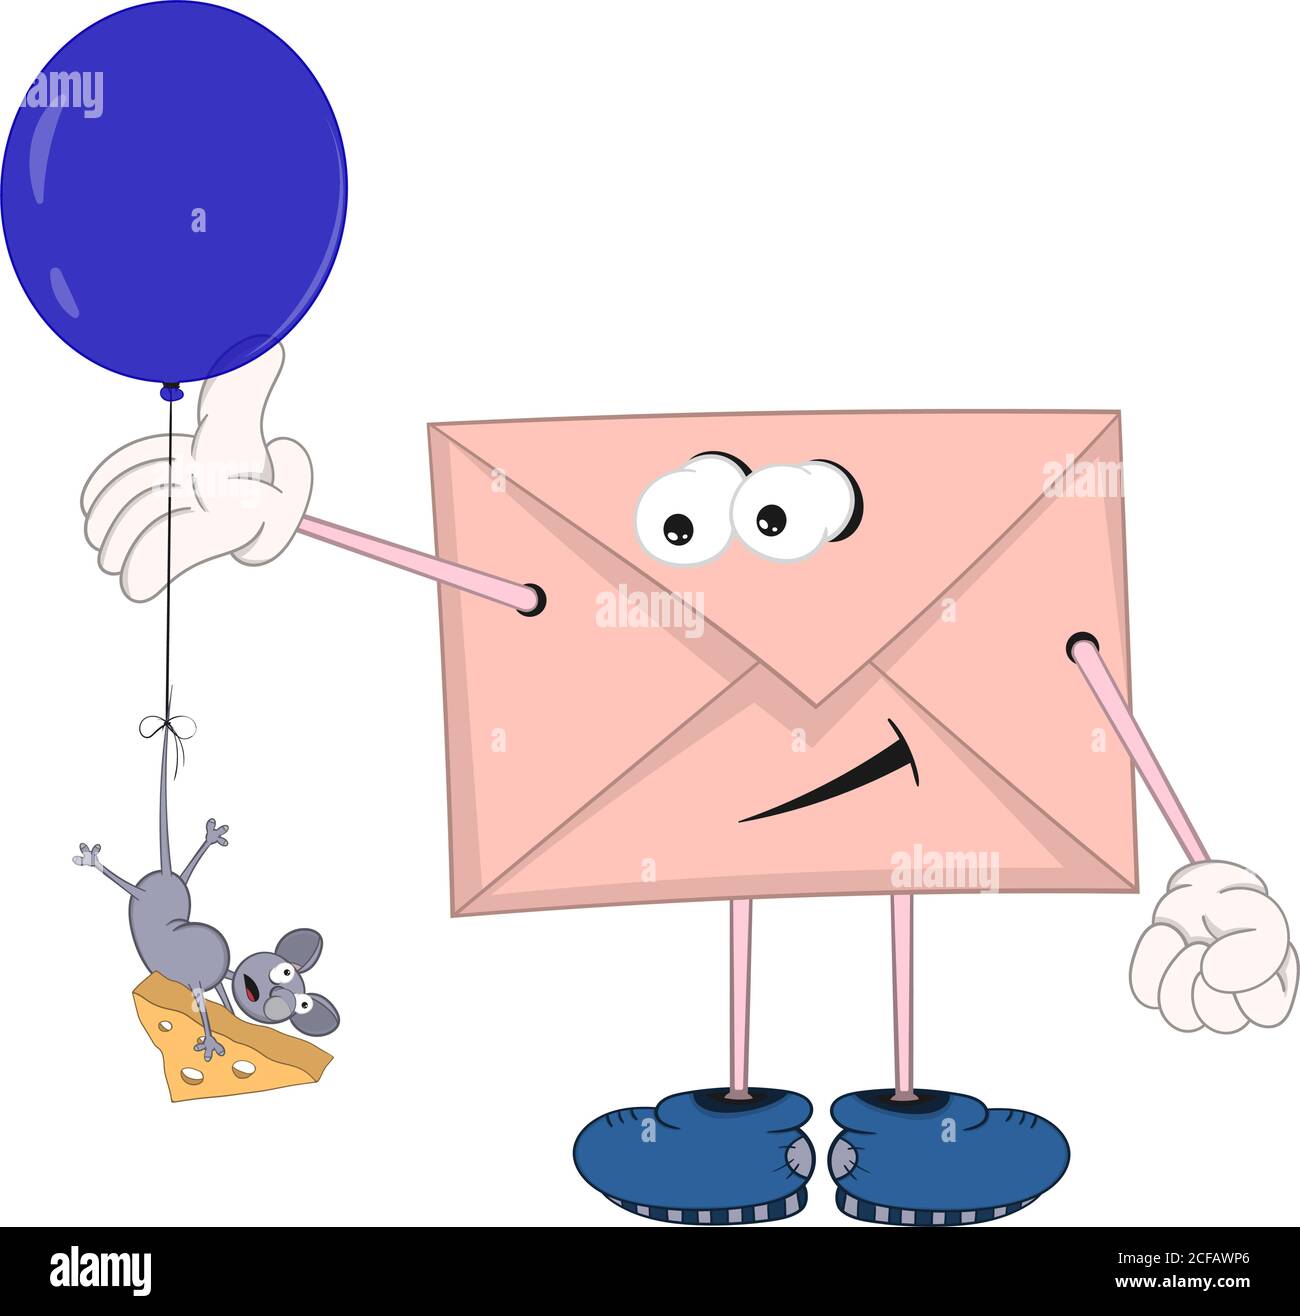 funny cartoon envelope with eyes, legs and hands looking like a little mouse flying in a balloon and holding cheese. Stock Vector